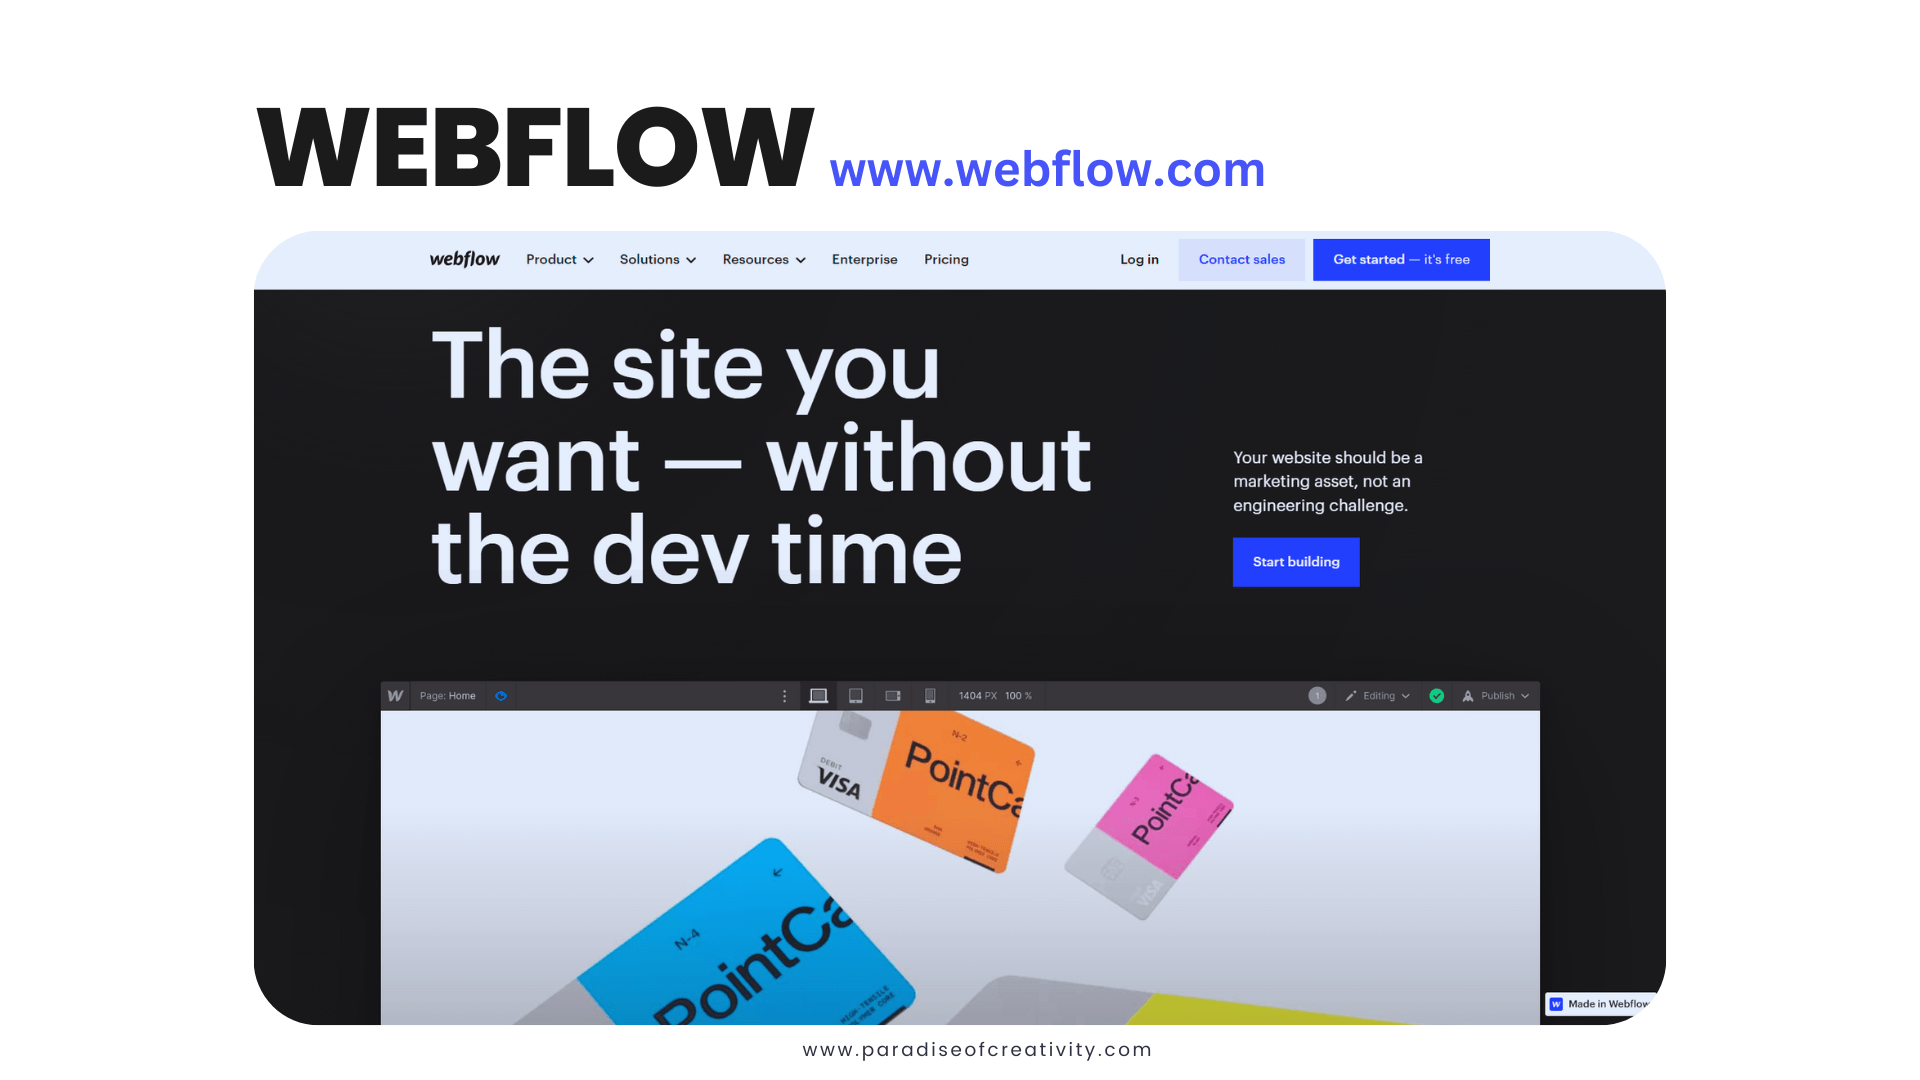 Webflow is the site you want — without the dev time